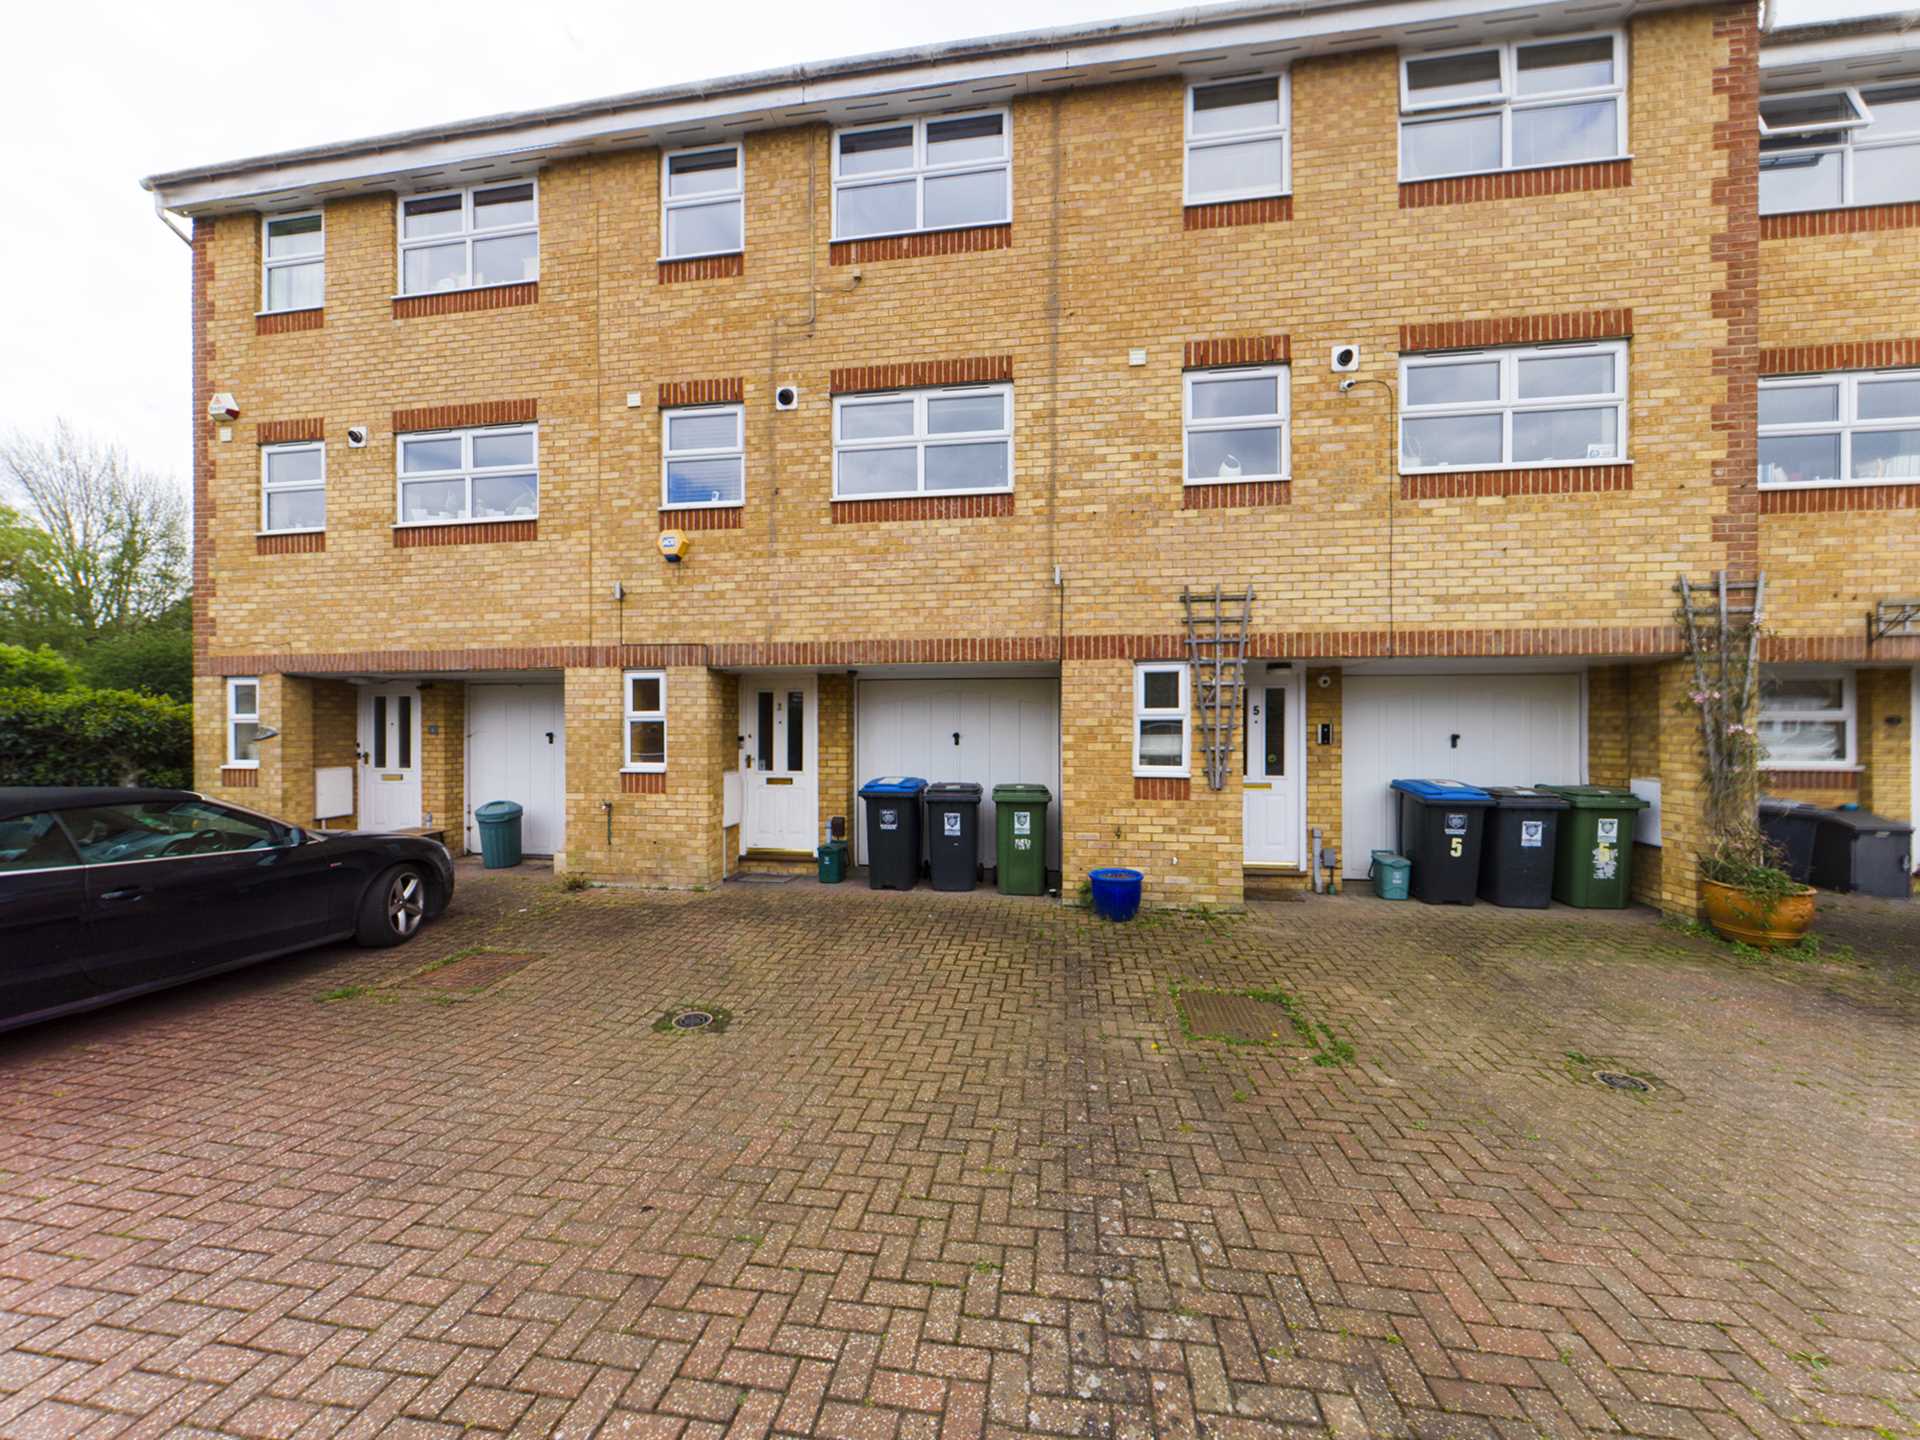 Swan Mead, Hemel Hempstead, Unfurnished, Available From 06/06/22, Image 2